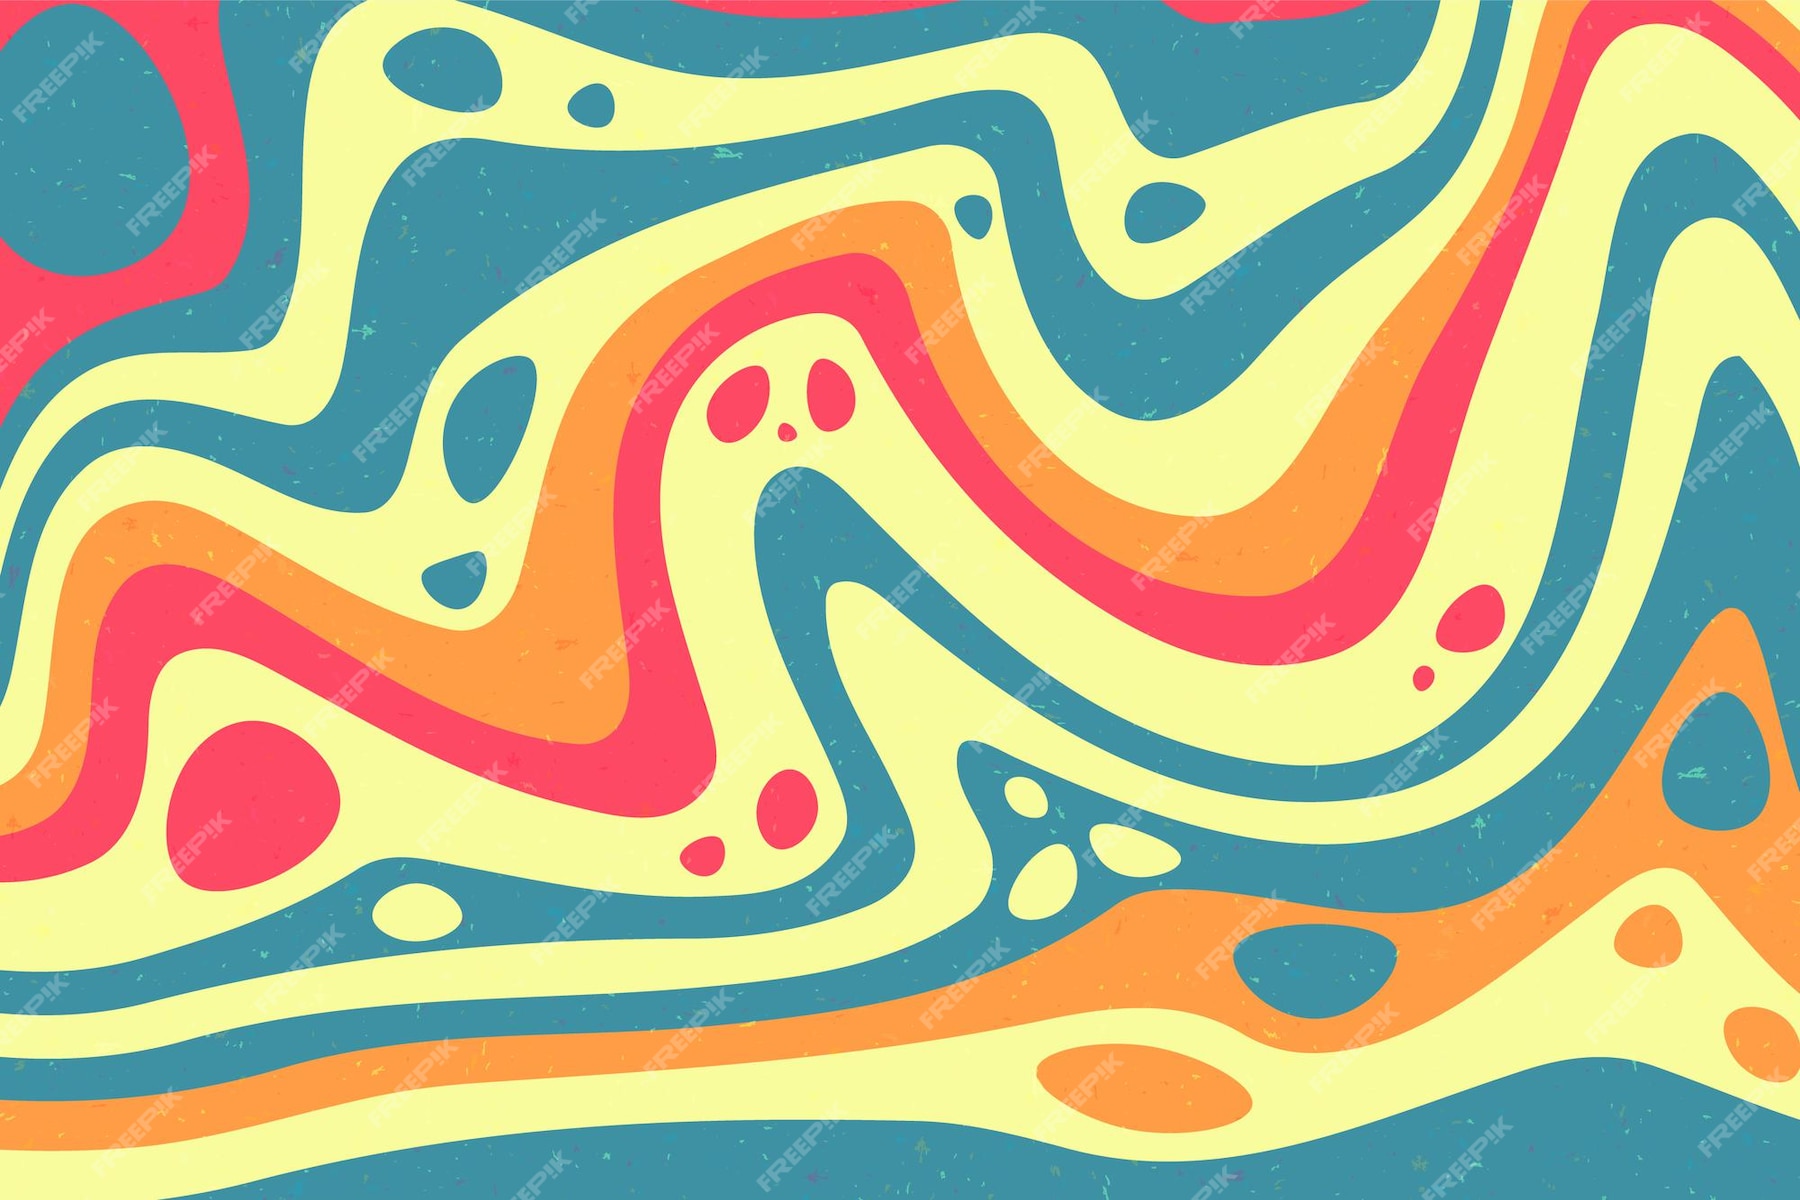 Premium Vector | Abstract psychedelic groovy background vector illustration